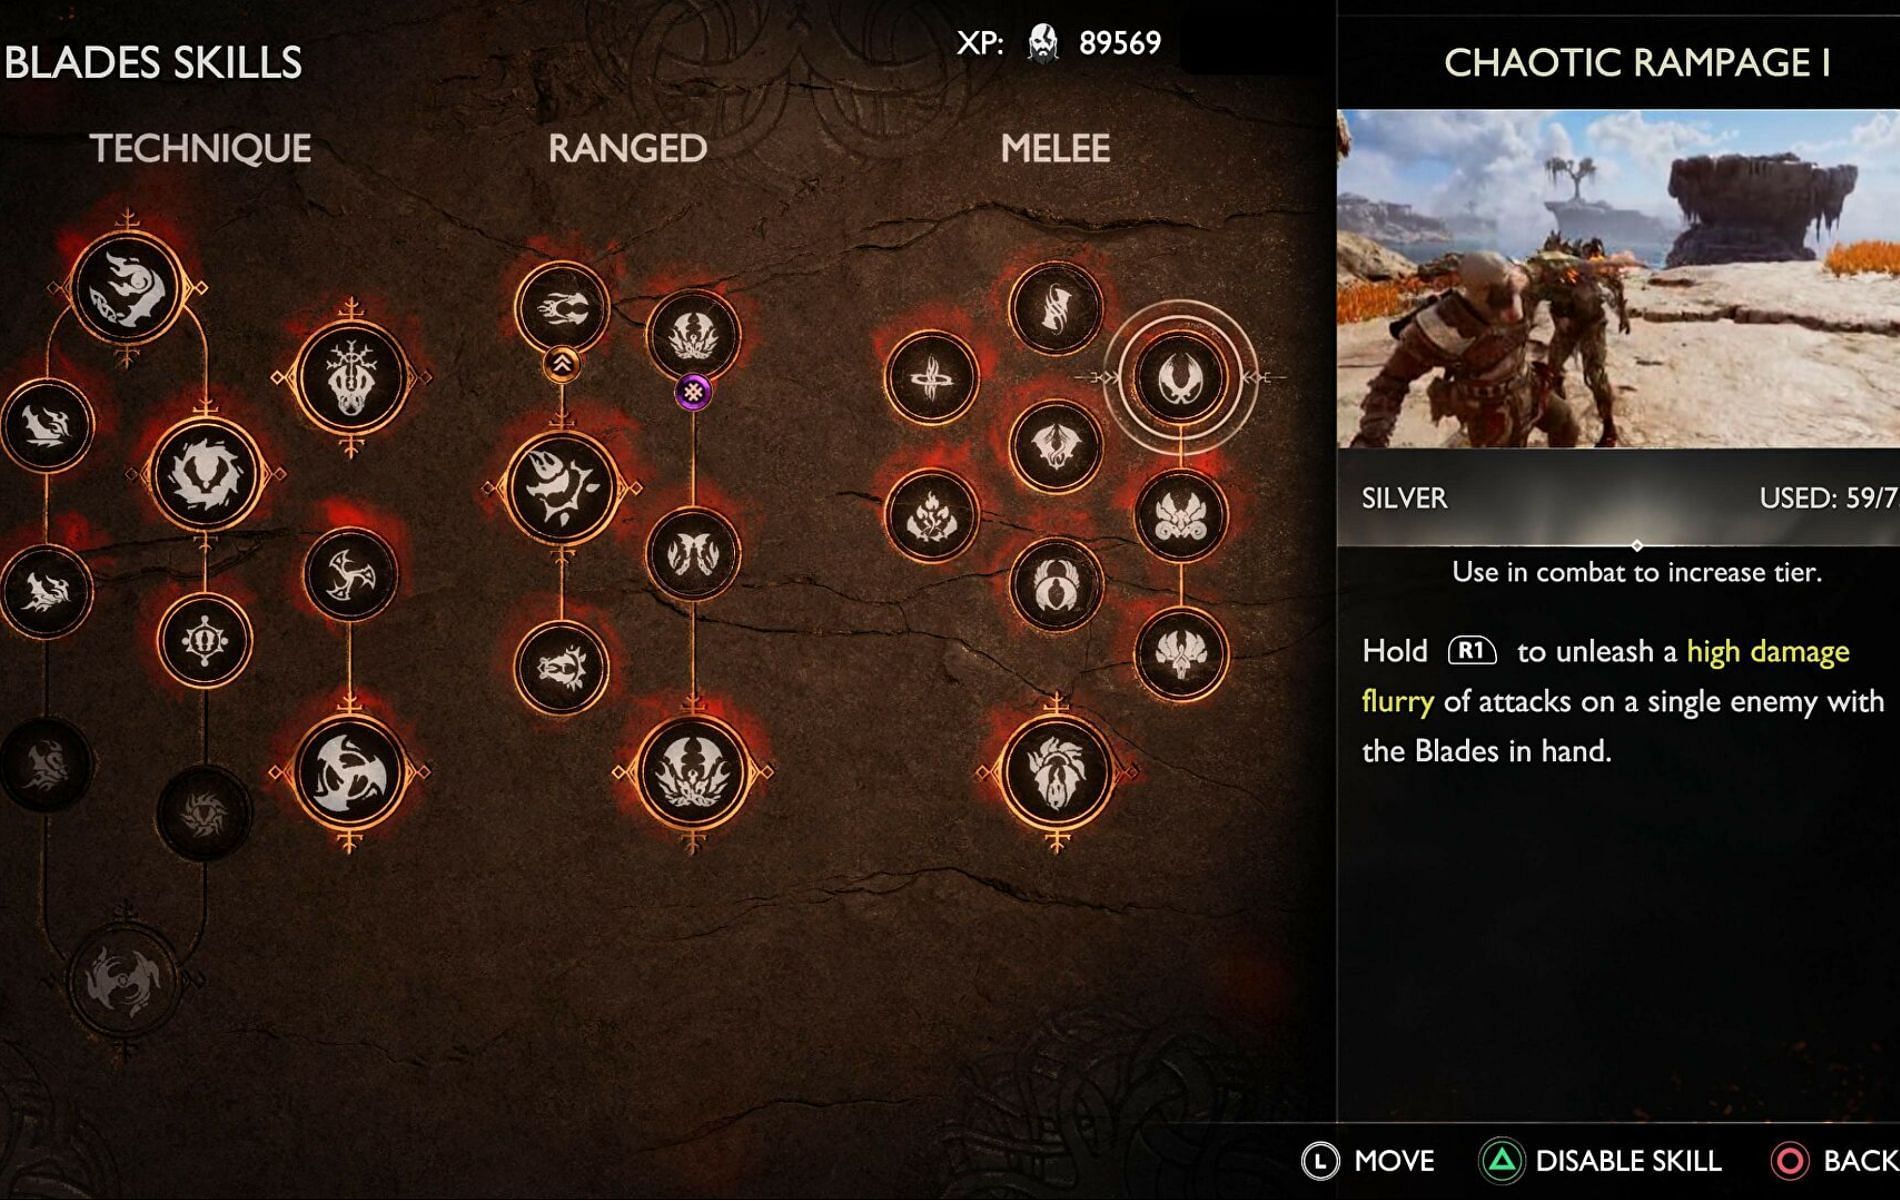 Blades of Chaos skill tree menu: Unlock the Chaotic Rampage skillset from the melee branch in the far right (Image via Santa Monica Studio)